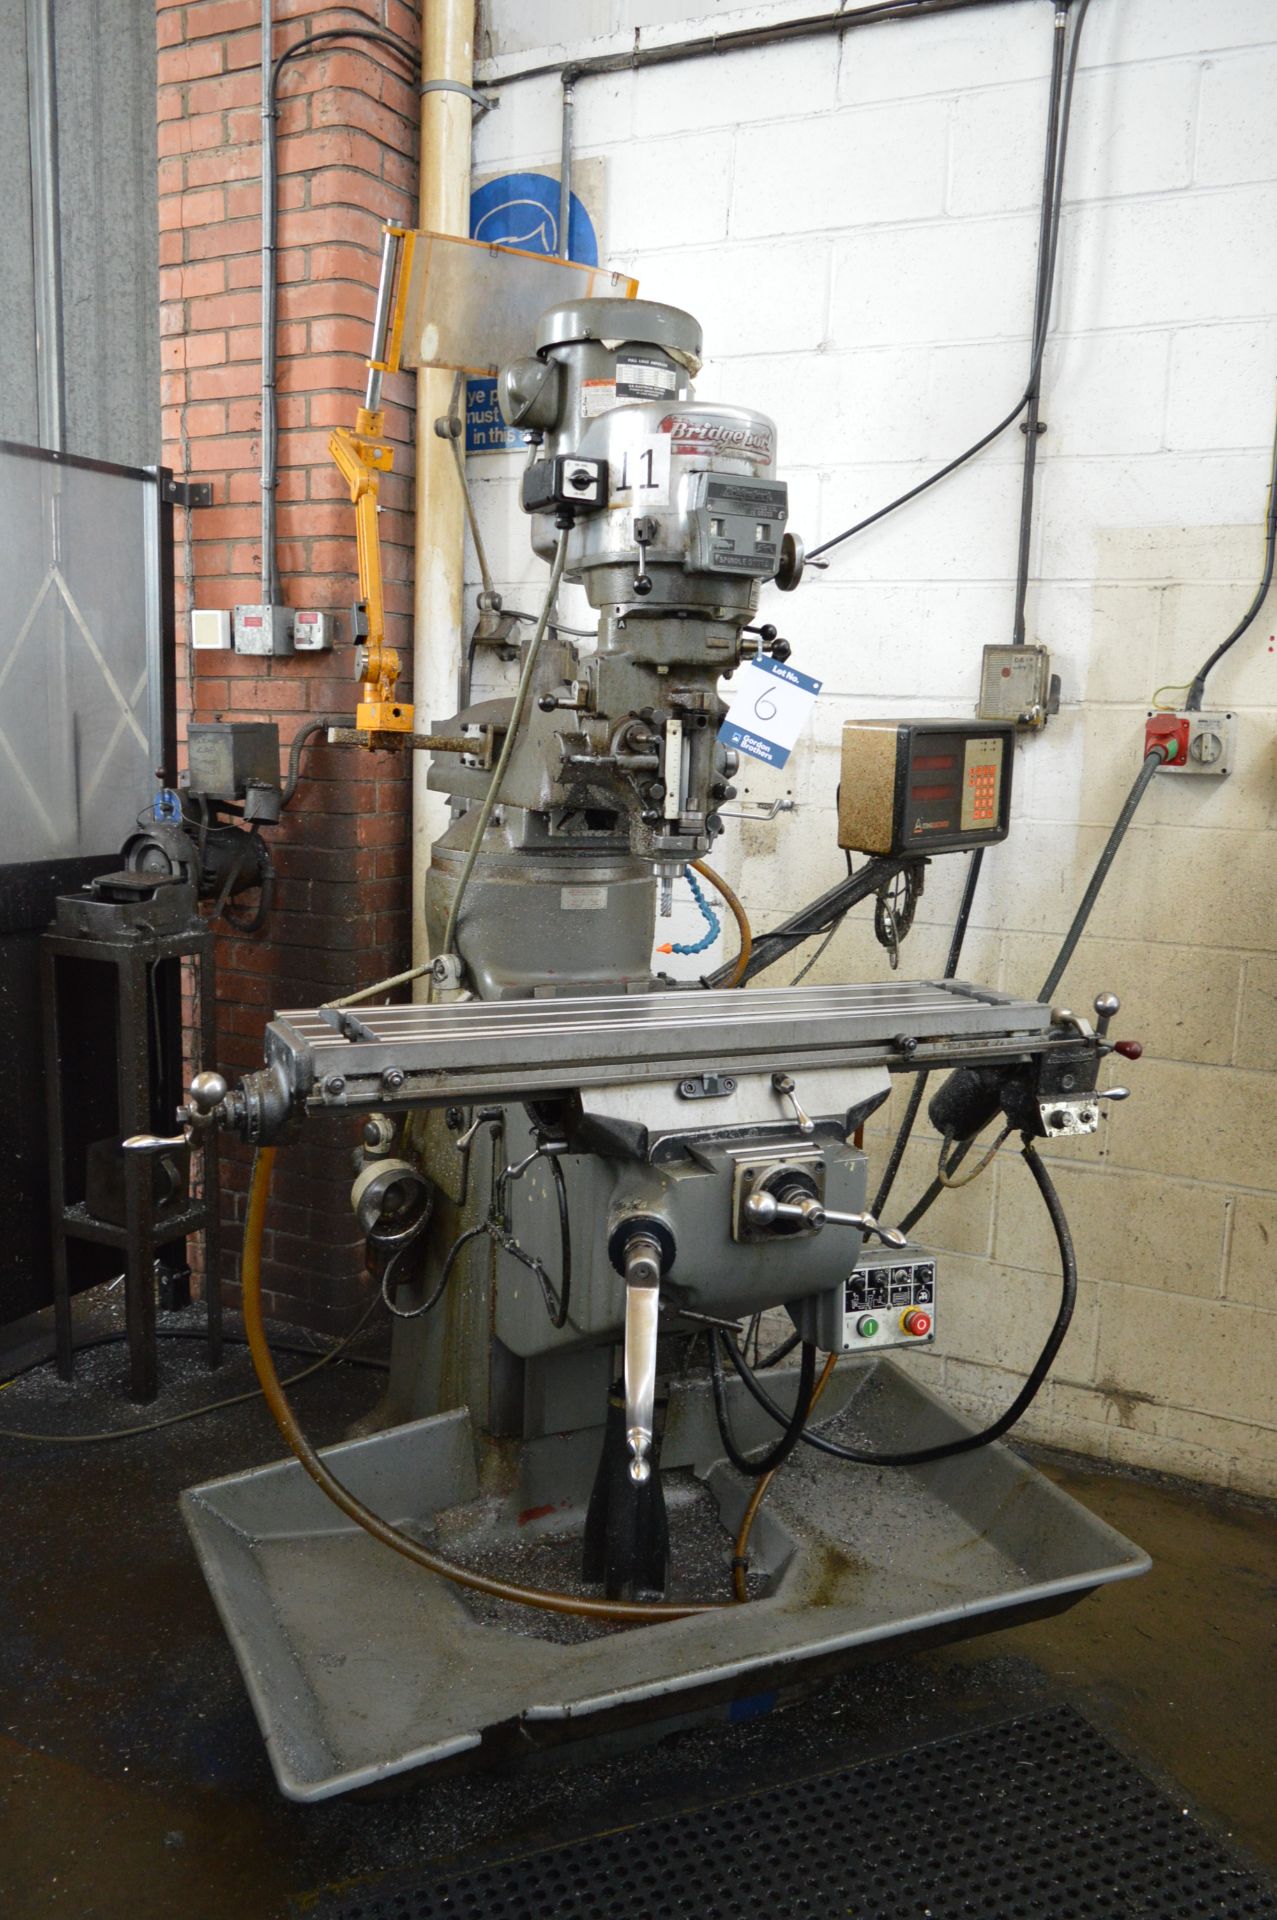 Bridgeport, 2-axis turret mill, Serial No. 162288 with Anilam Mini Wizard, digital readout, Bed size